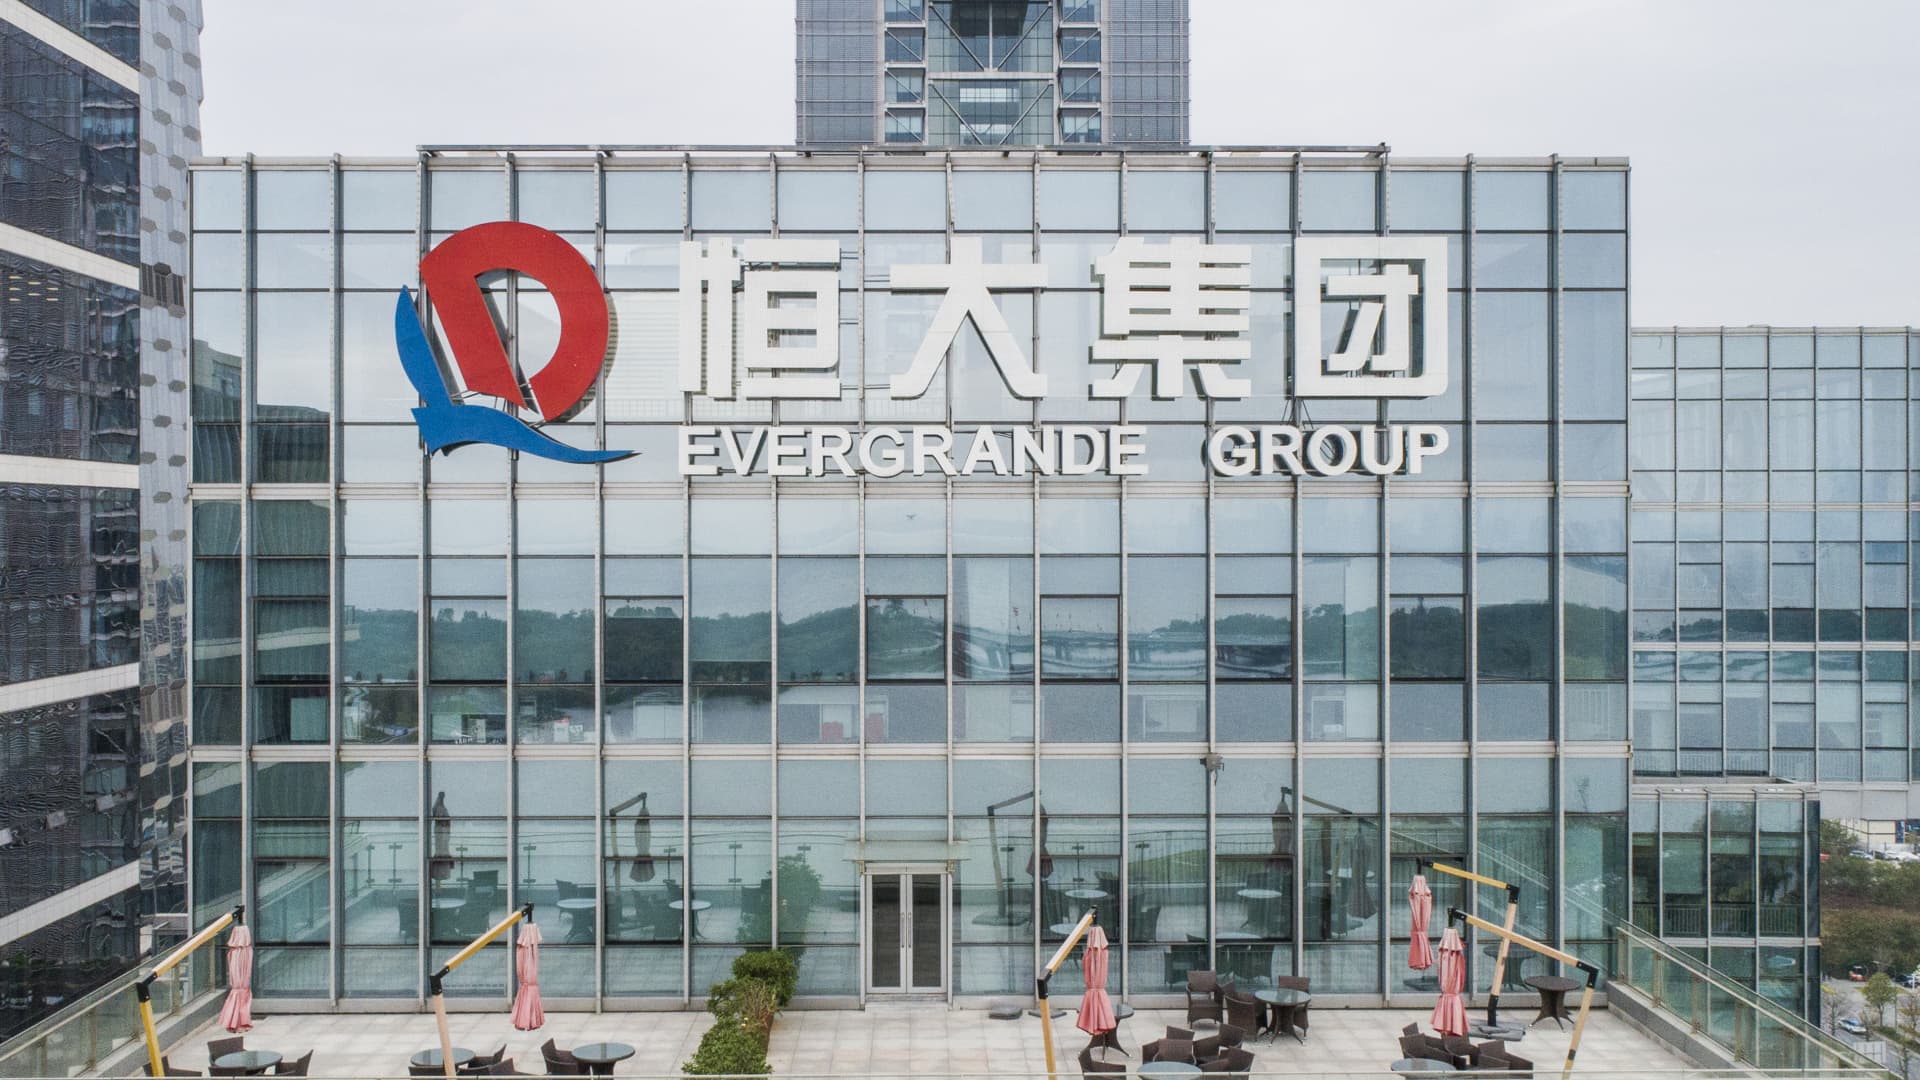 China Evergrande Group's headquarters in Shenzhen, China's Guangdong province on Feb. 9, 2021.